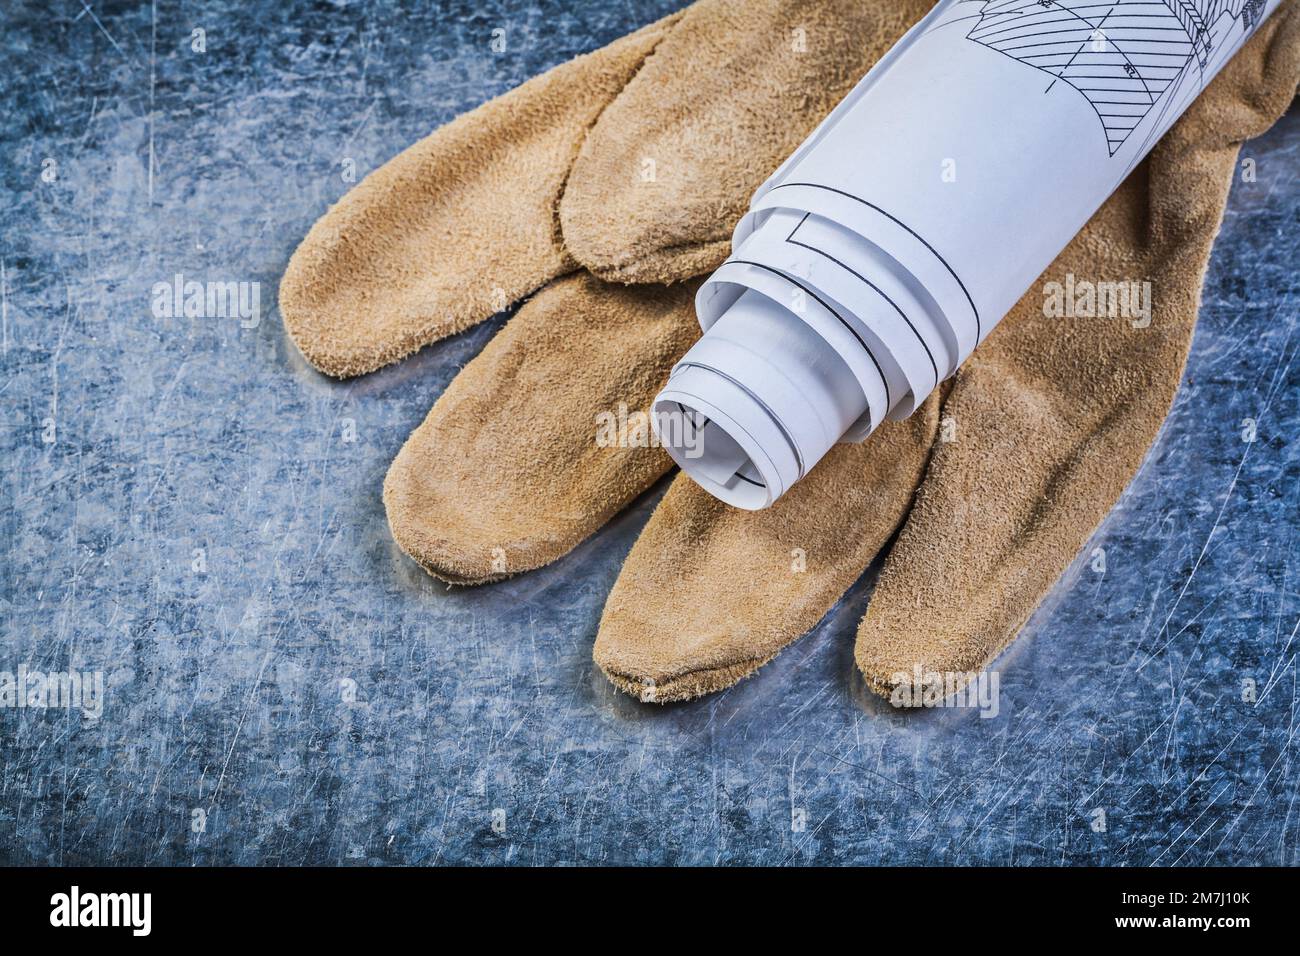 Rolled up engineering drawings leather protective gloves on metallic background construction concept. Stock Photo